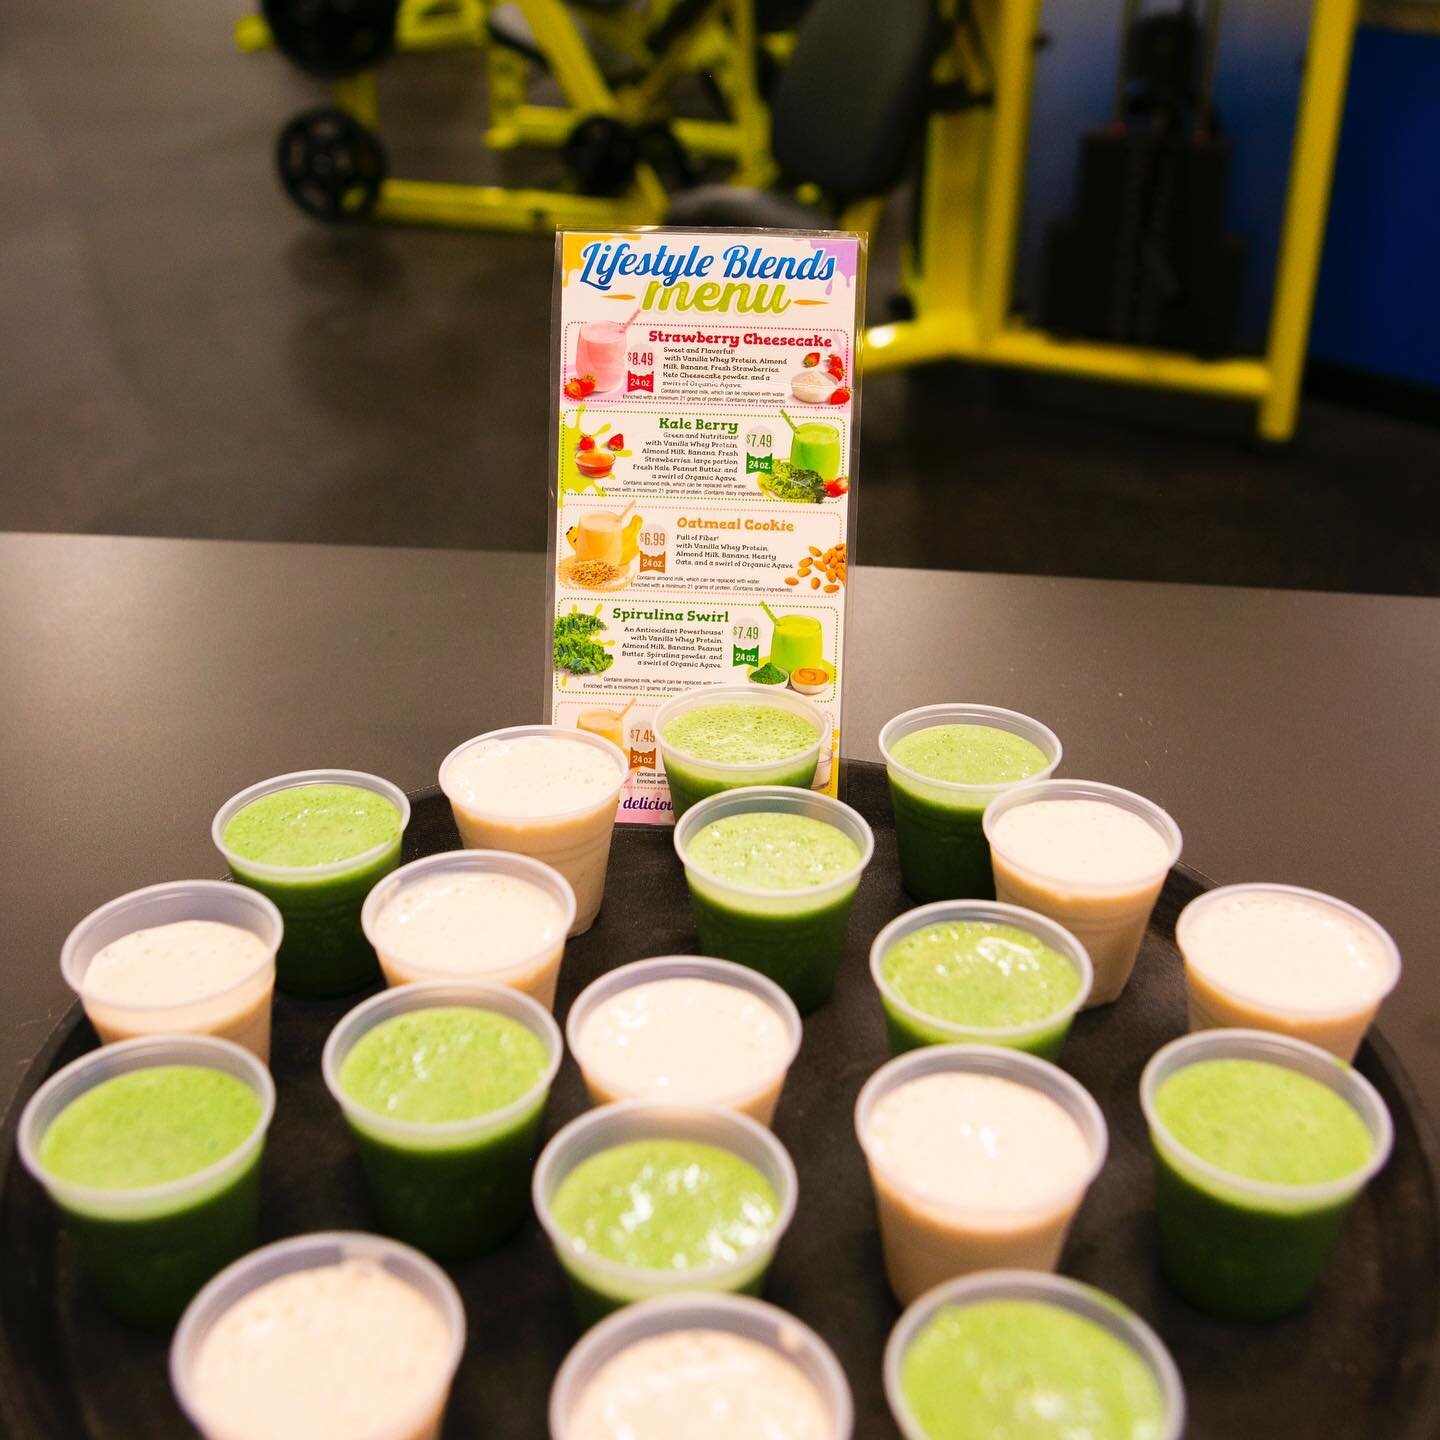 We love our neighbors here at Better Lifestyle Club and are always looking to connect with our community! Giving out some samples of our delicious smoothies is just one of the ways we like to connect with our local businesses! If you are local to the